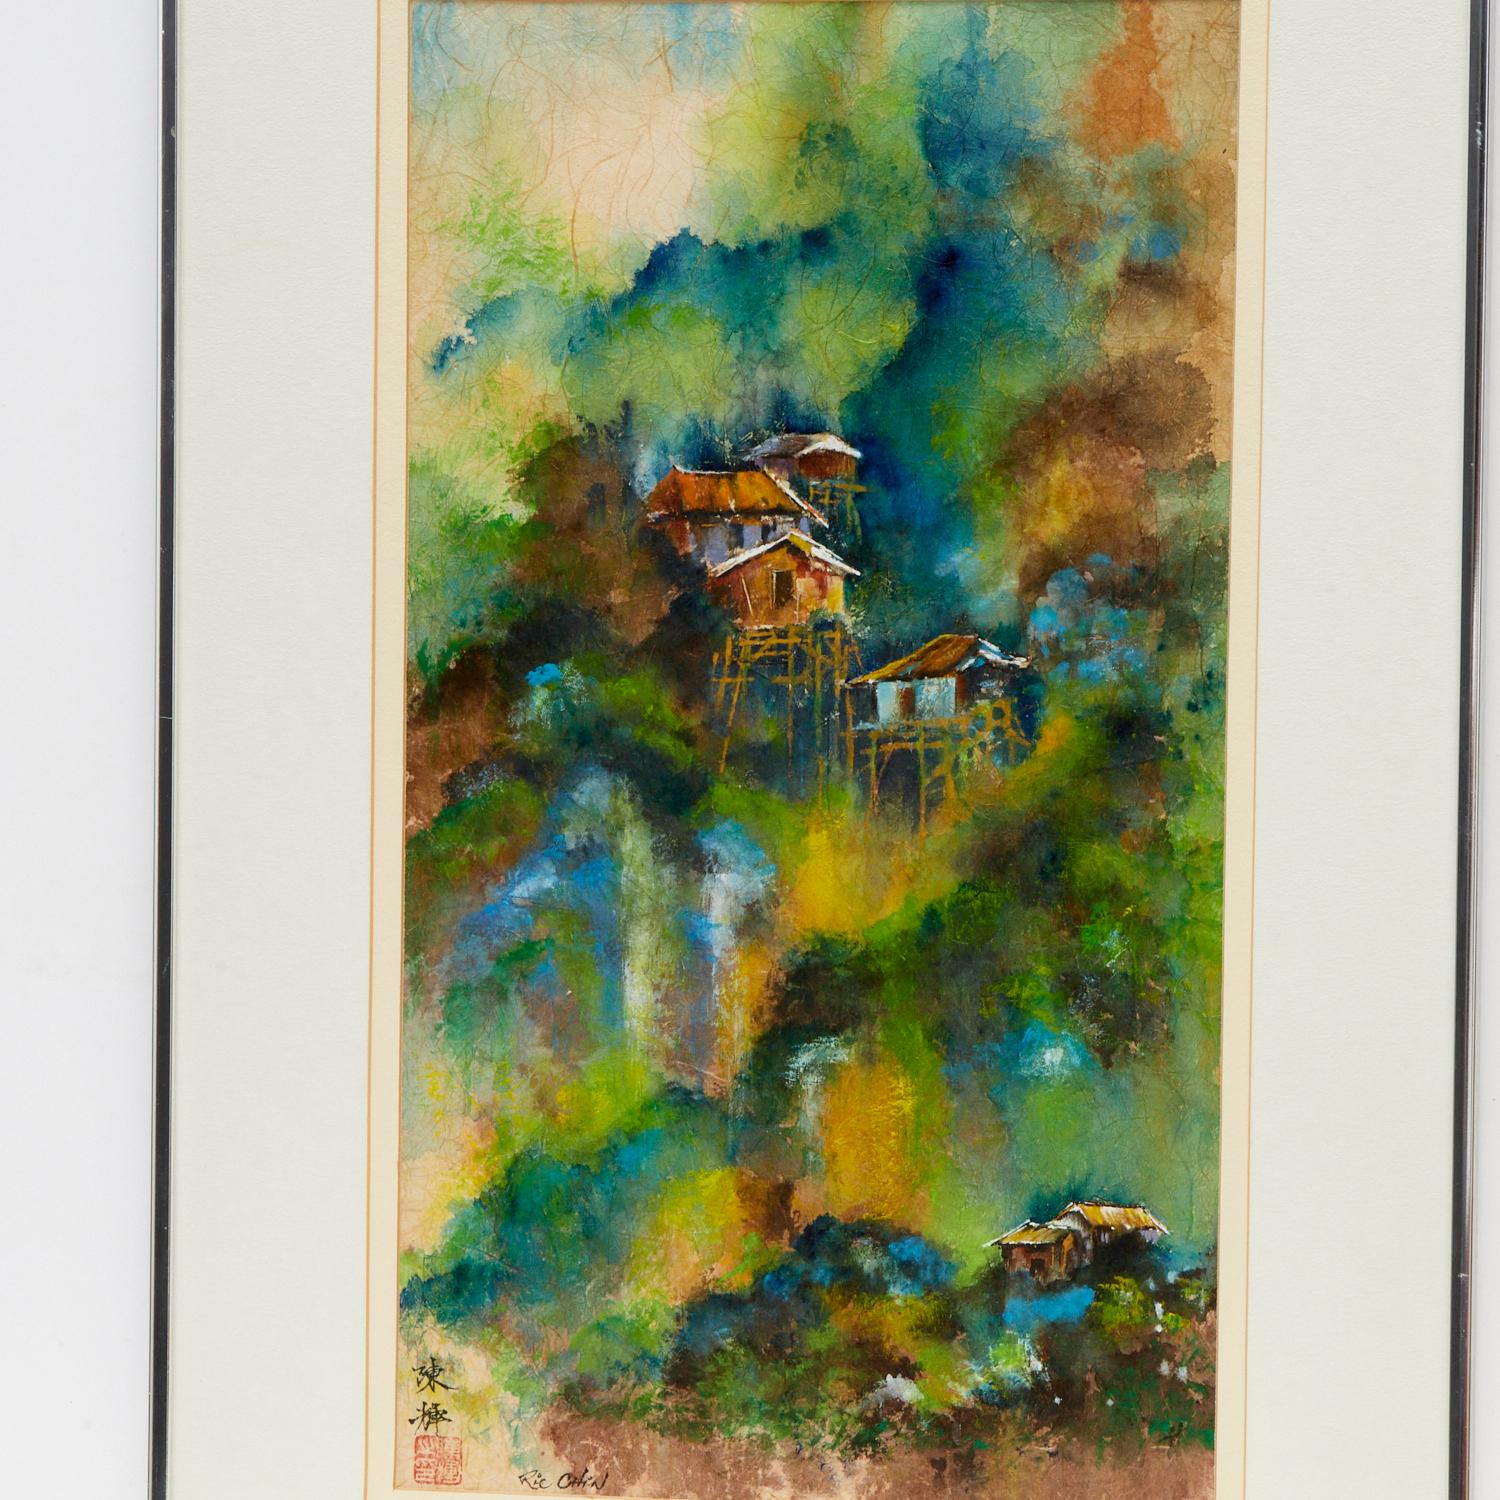 Ric Chin (1935-2022, Chinese/American), Houses in Landscape, a watercolor on textured paper, signed lower left, matted and framed under glass. 

The jewel tones of emerald green, sapphire blue and amber in this watercolor are vivid and striking. The